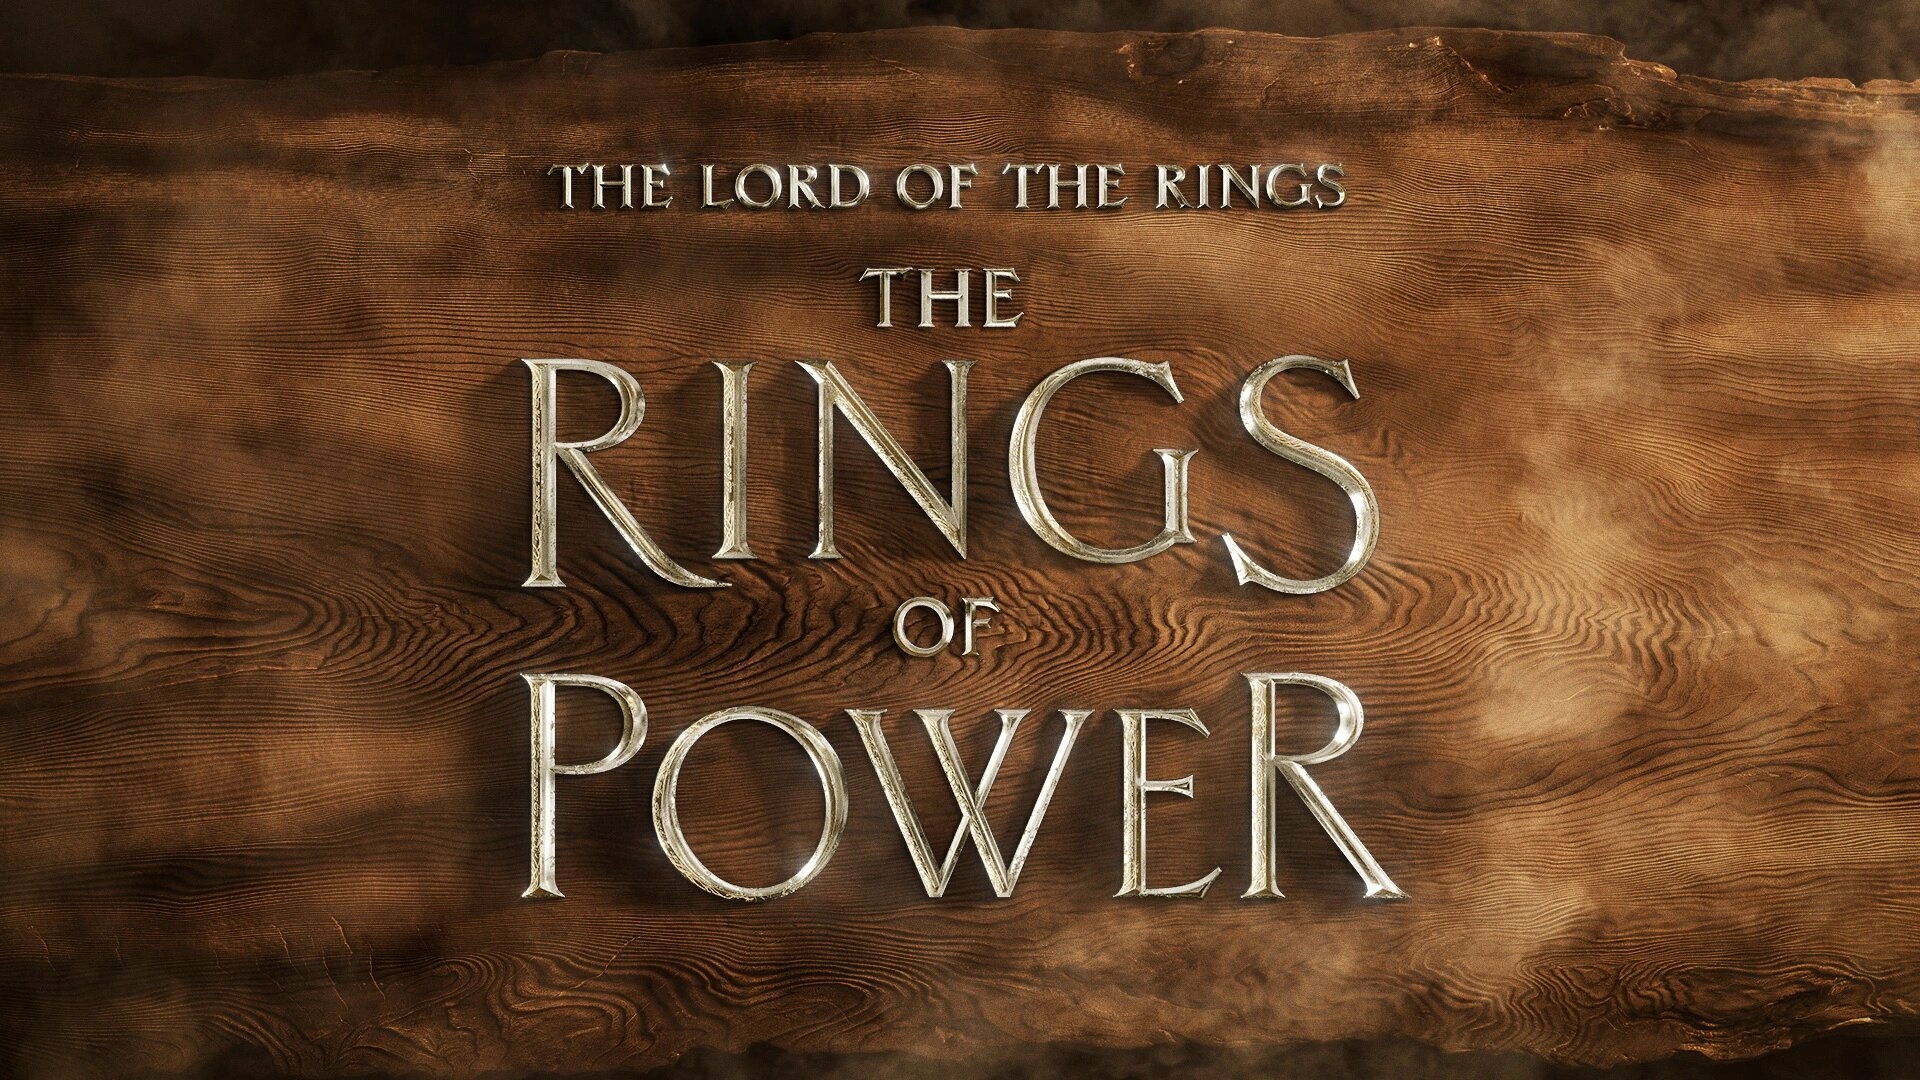 Prime Video Adds 'The Lord of the Rings,' 'Hobbit' Trilogies Ahead of 'Rings of Power' Premiere